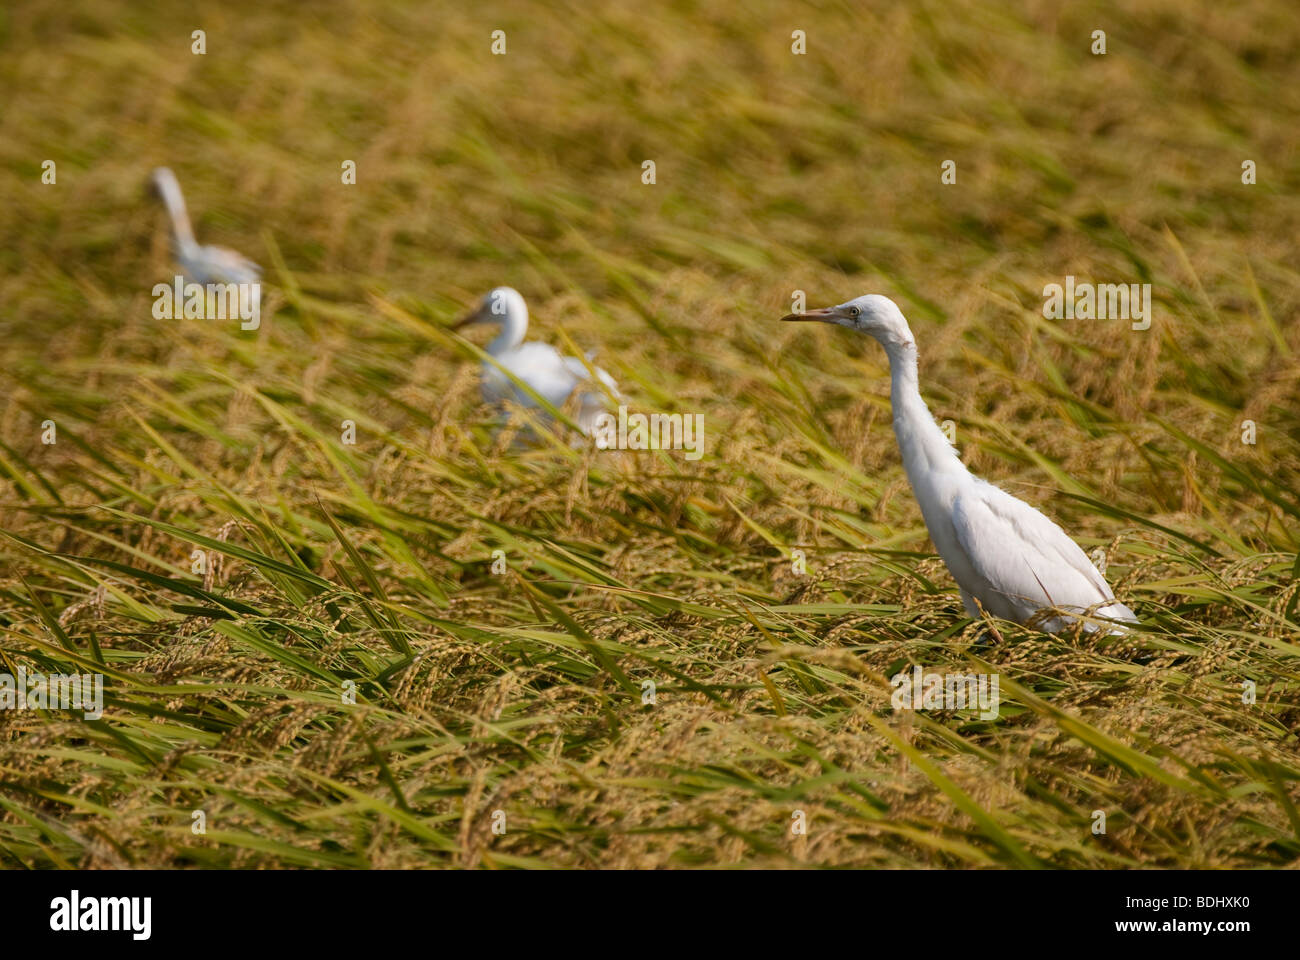 Egrets looking for food in a rice field during harvest season in mid summer in Japan Stock Photo